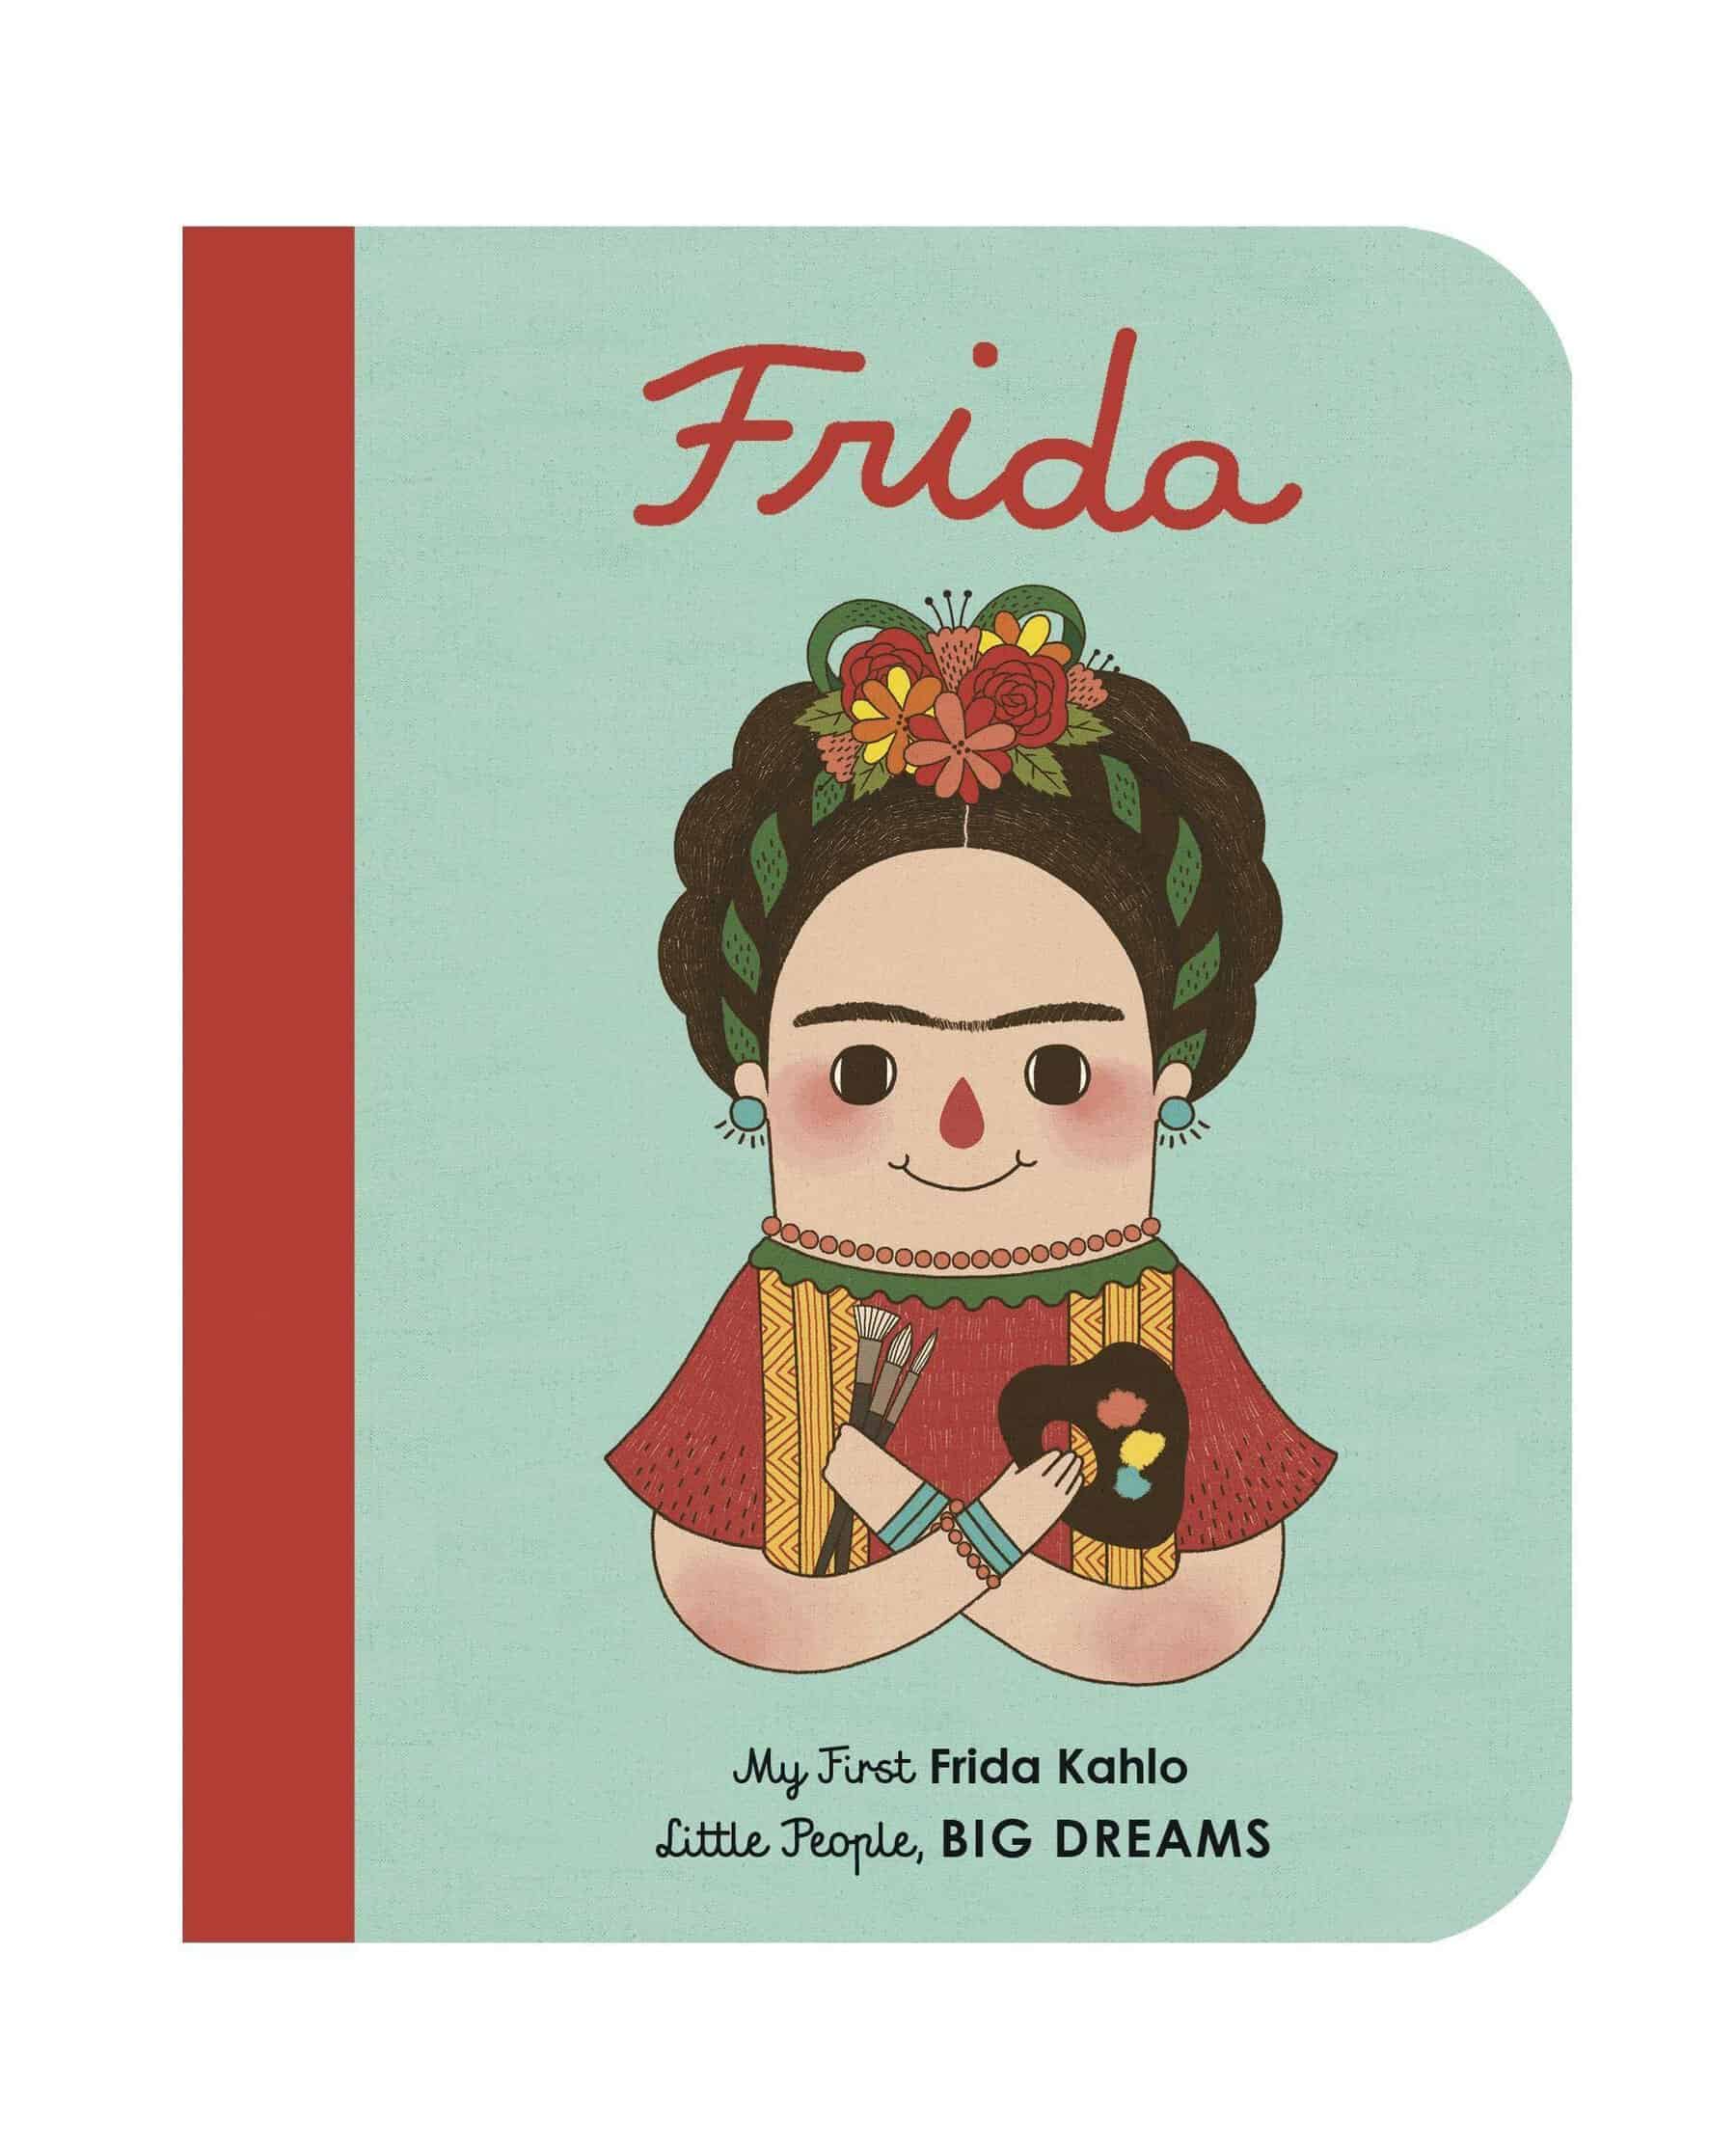 My First Frida Kahlo Little People BIG DREAMS